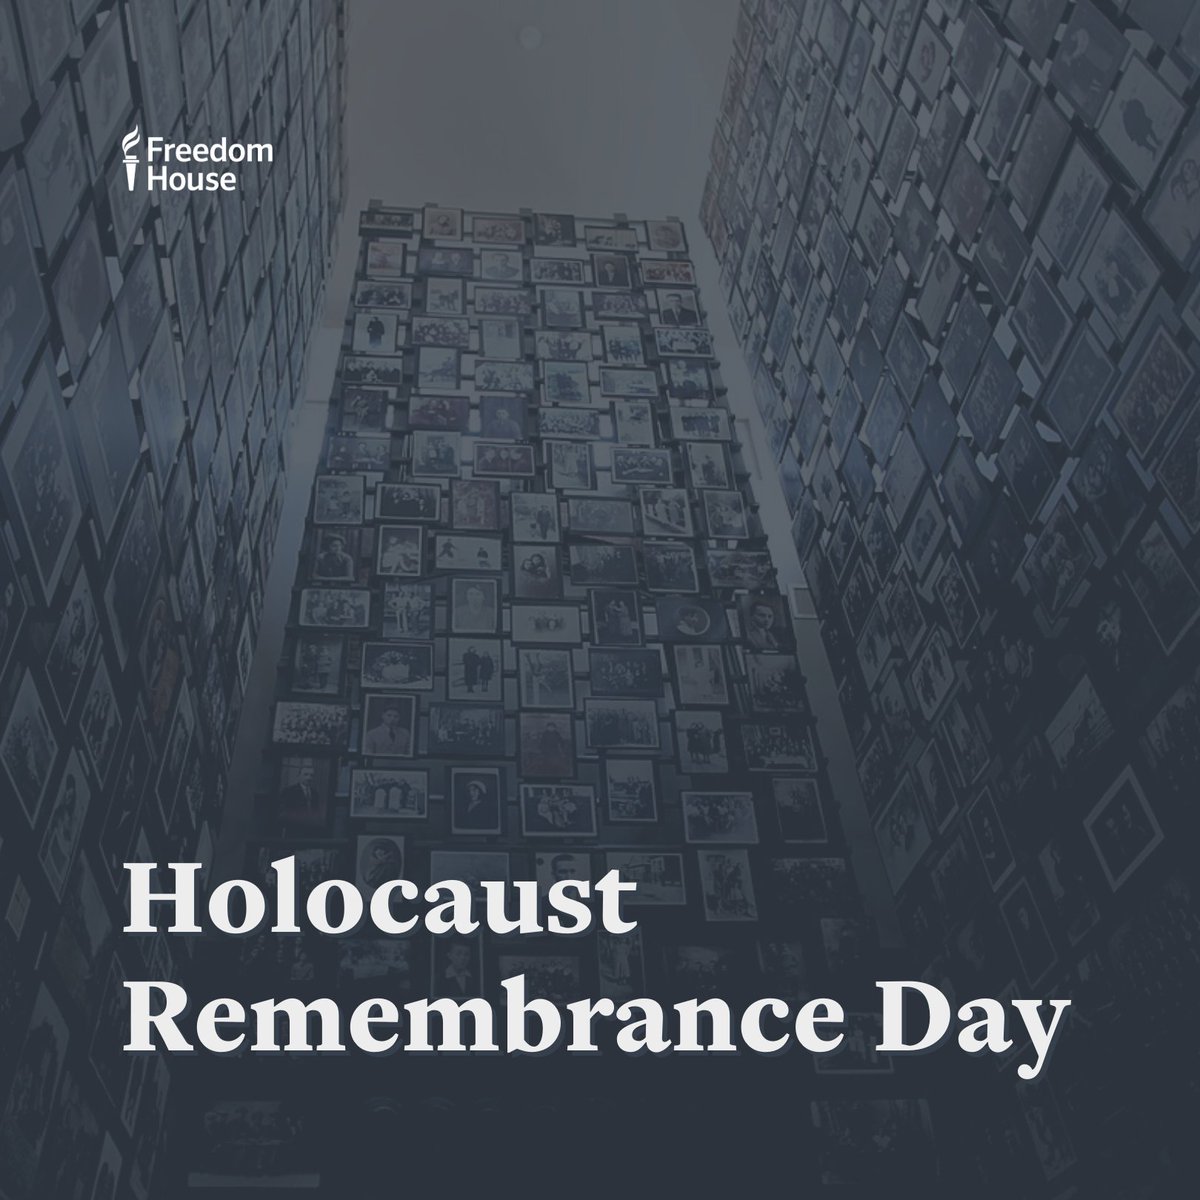 Today, we solemnly remember the millions of lives lost to the Holocaust. The fuel of fascism is bigotry and violence, and, just as in the 1940s, we are committed to defending global freedom, justice, and democracy against these threats. #HolocaustRemembrance